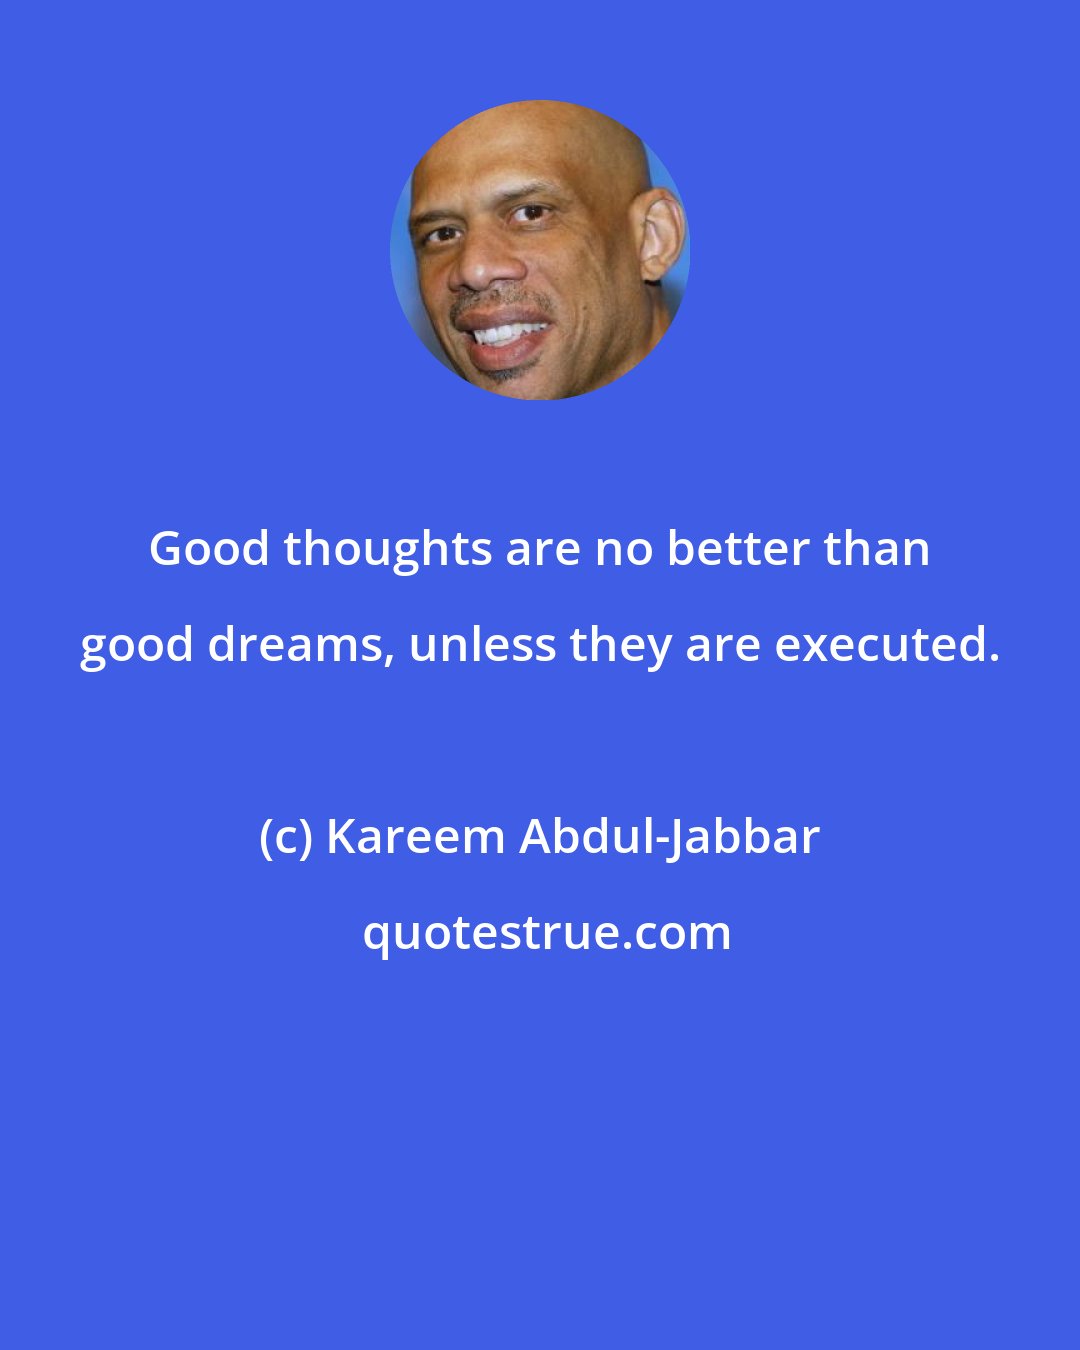 Kareem Abdul-Jabbar: Good thoughts are no better than good dreams, unless they are executed.